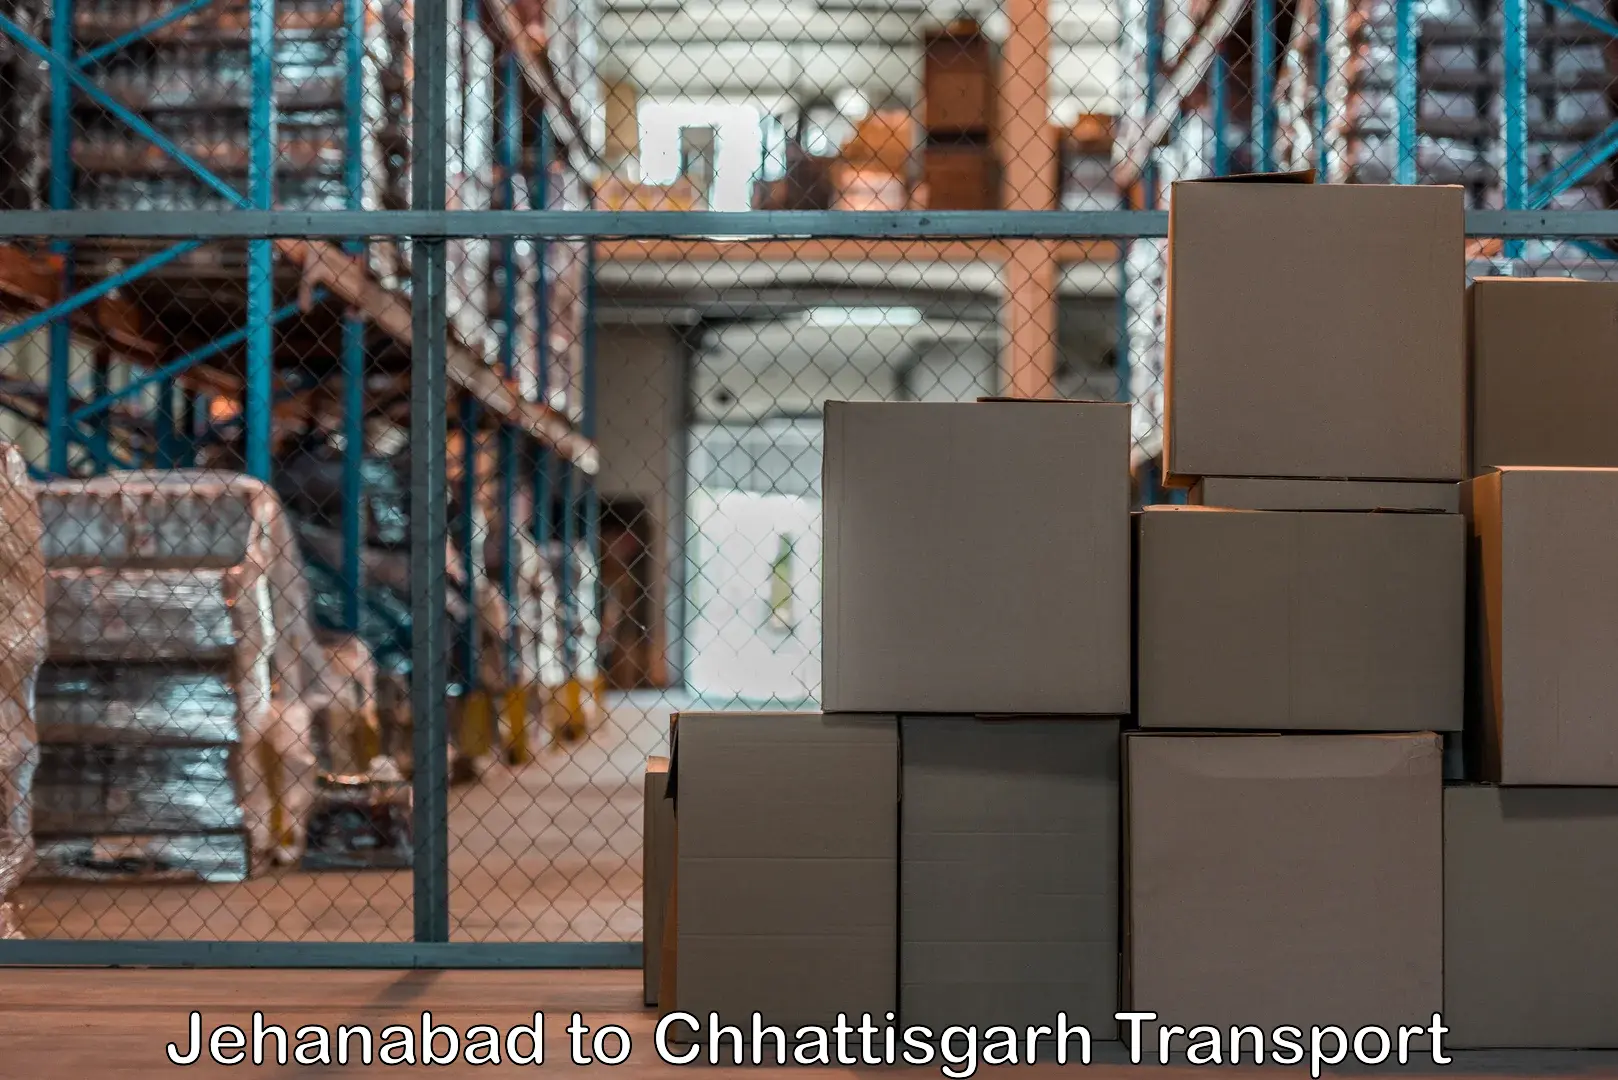 Truck transport companies in India Jehanabad to Raipur